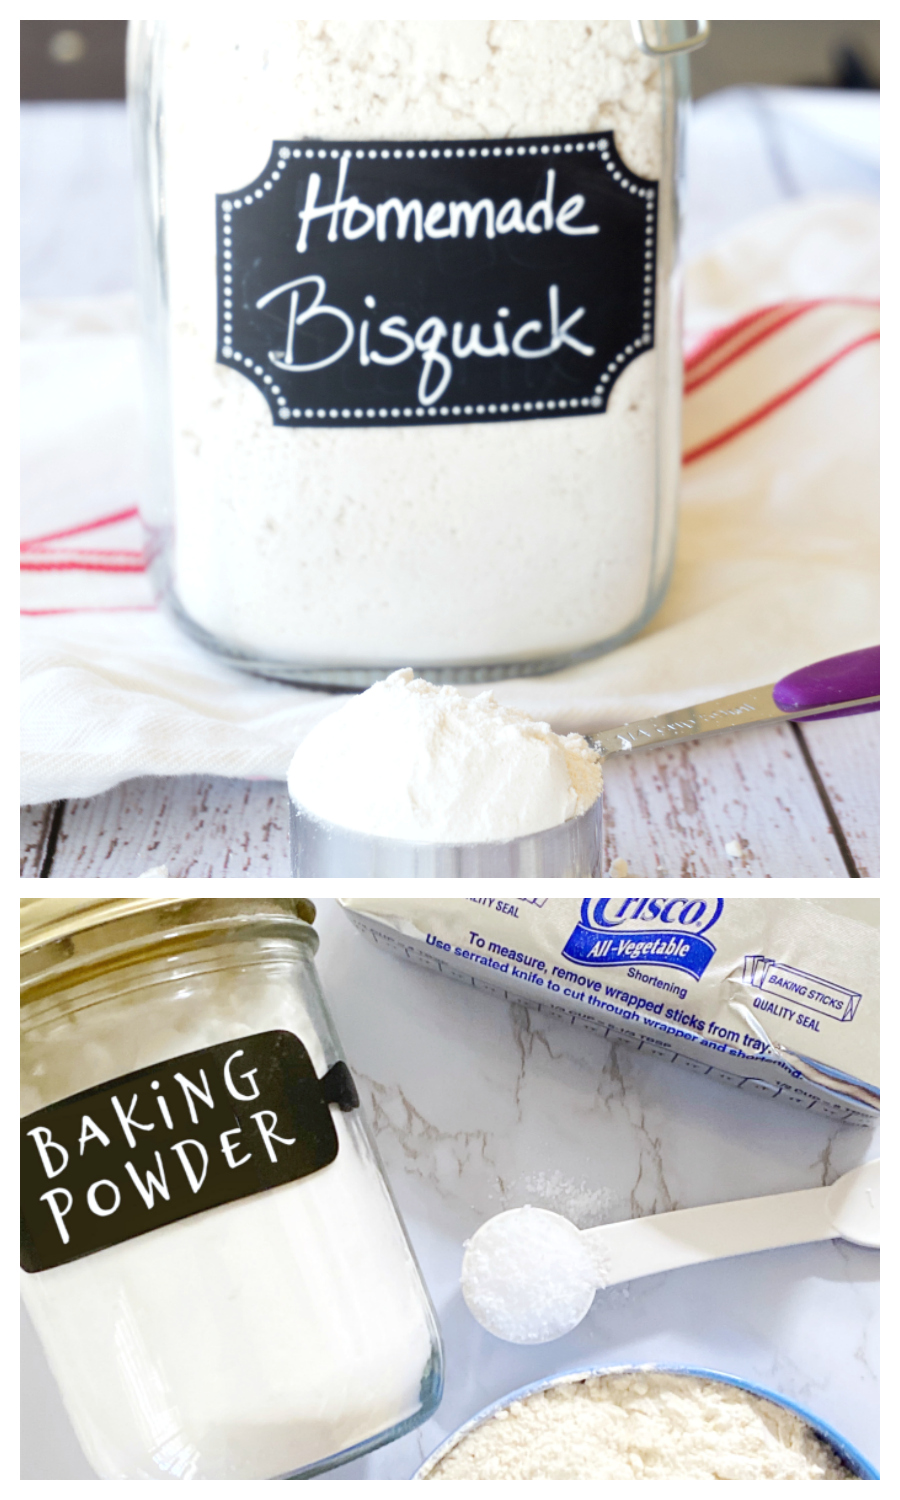 Homemade Bisquick - Learn how to make all-purpose baking mix at home. Save money making biscuits, pancakes, waffles and more with this pantry staple! #homemadebisquick #diy #bisquick #bakingmix #pantrystaples via @slingmama